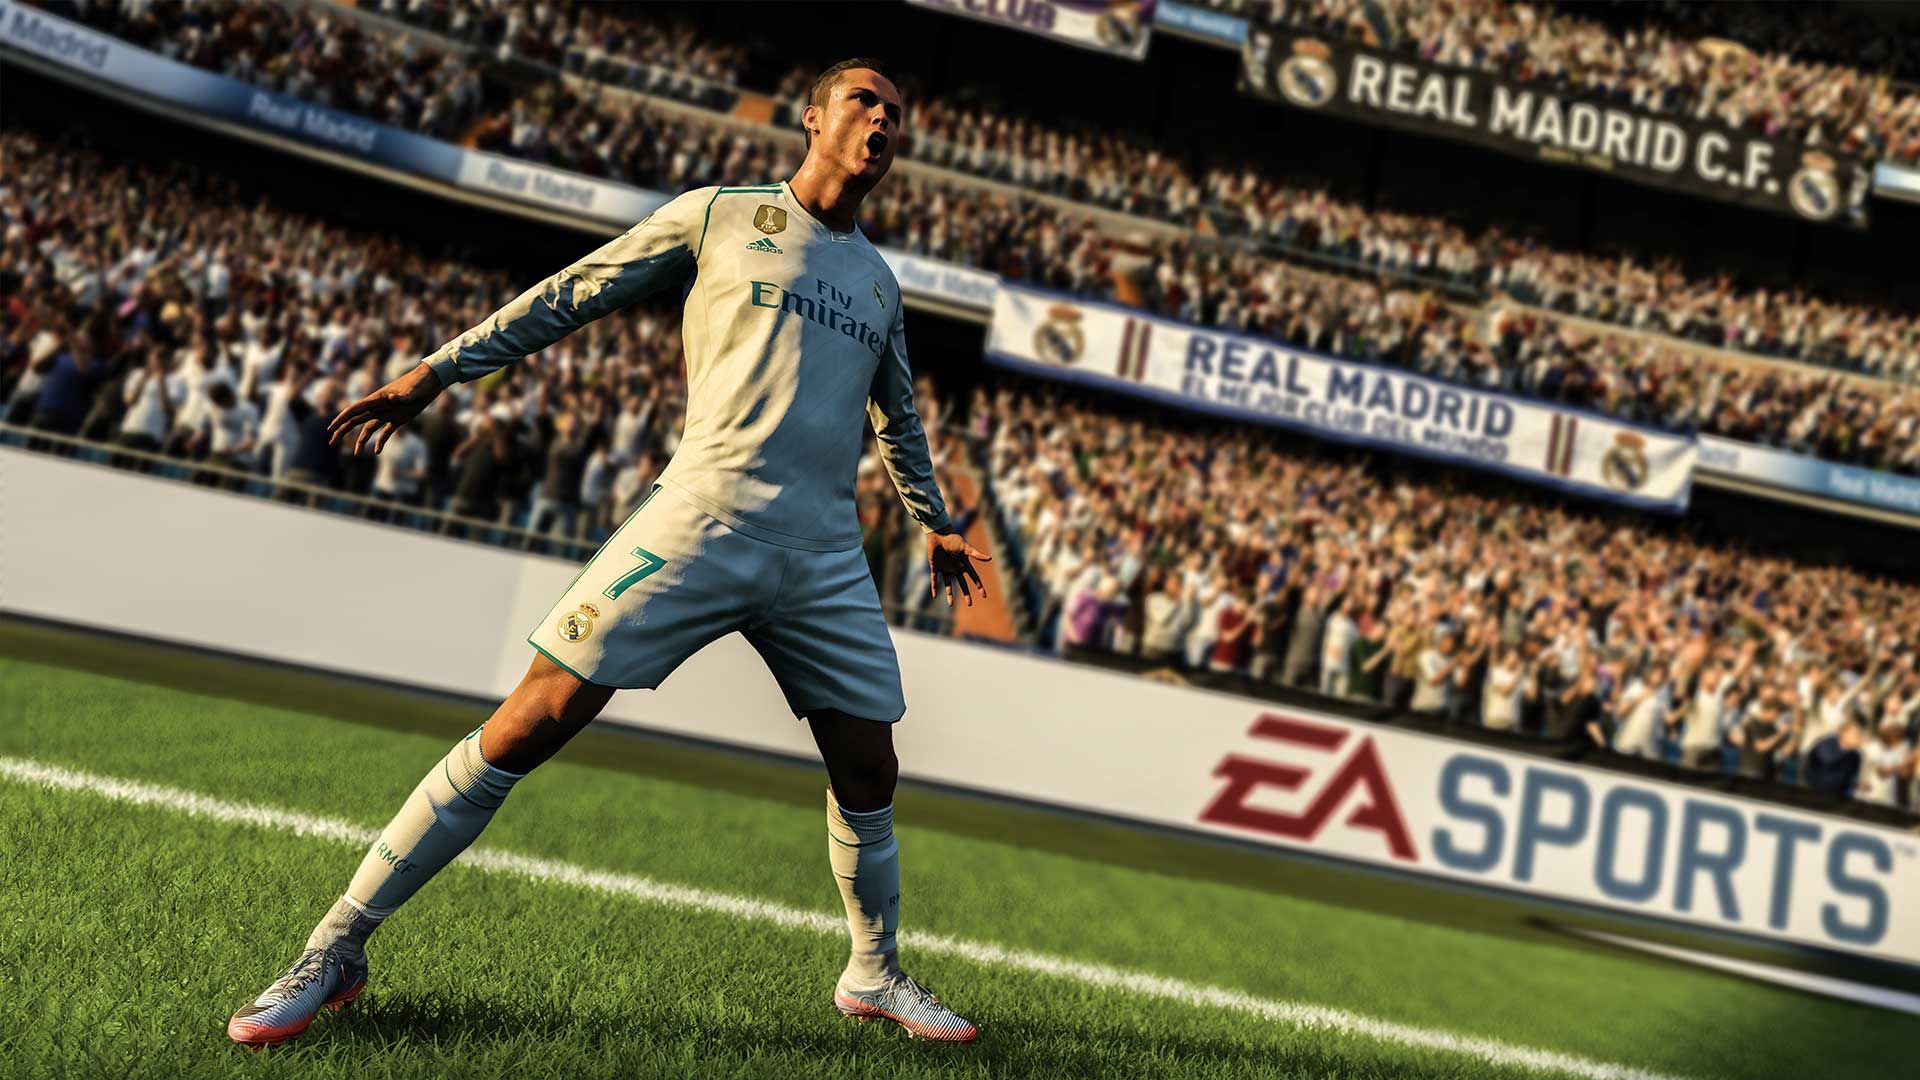 Fifa 18 For Windows 10 Free Download